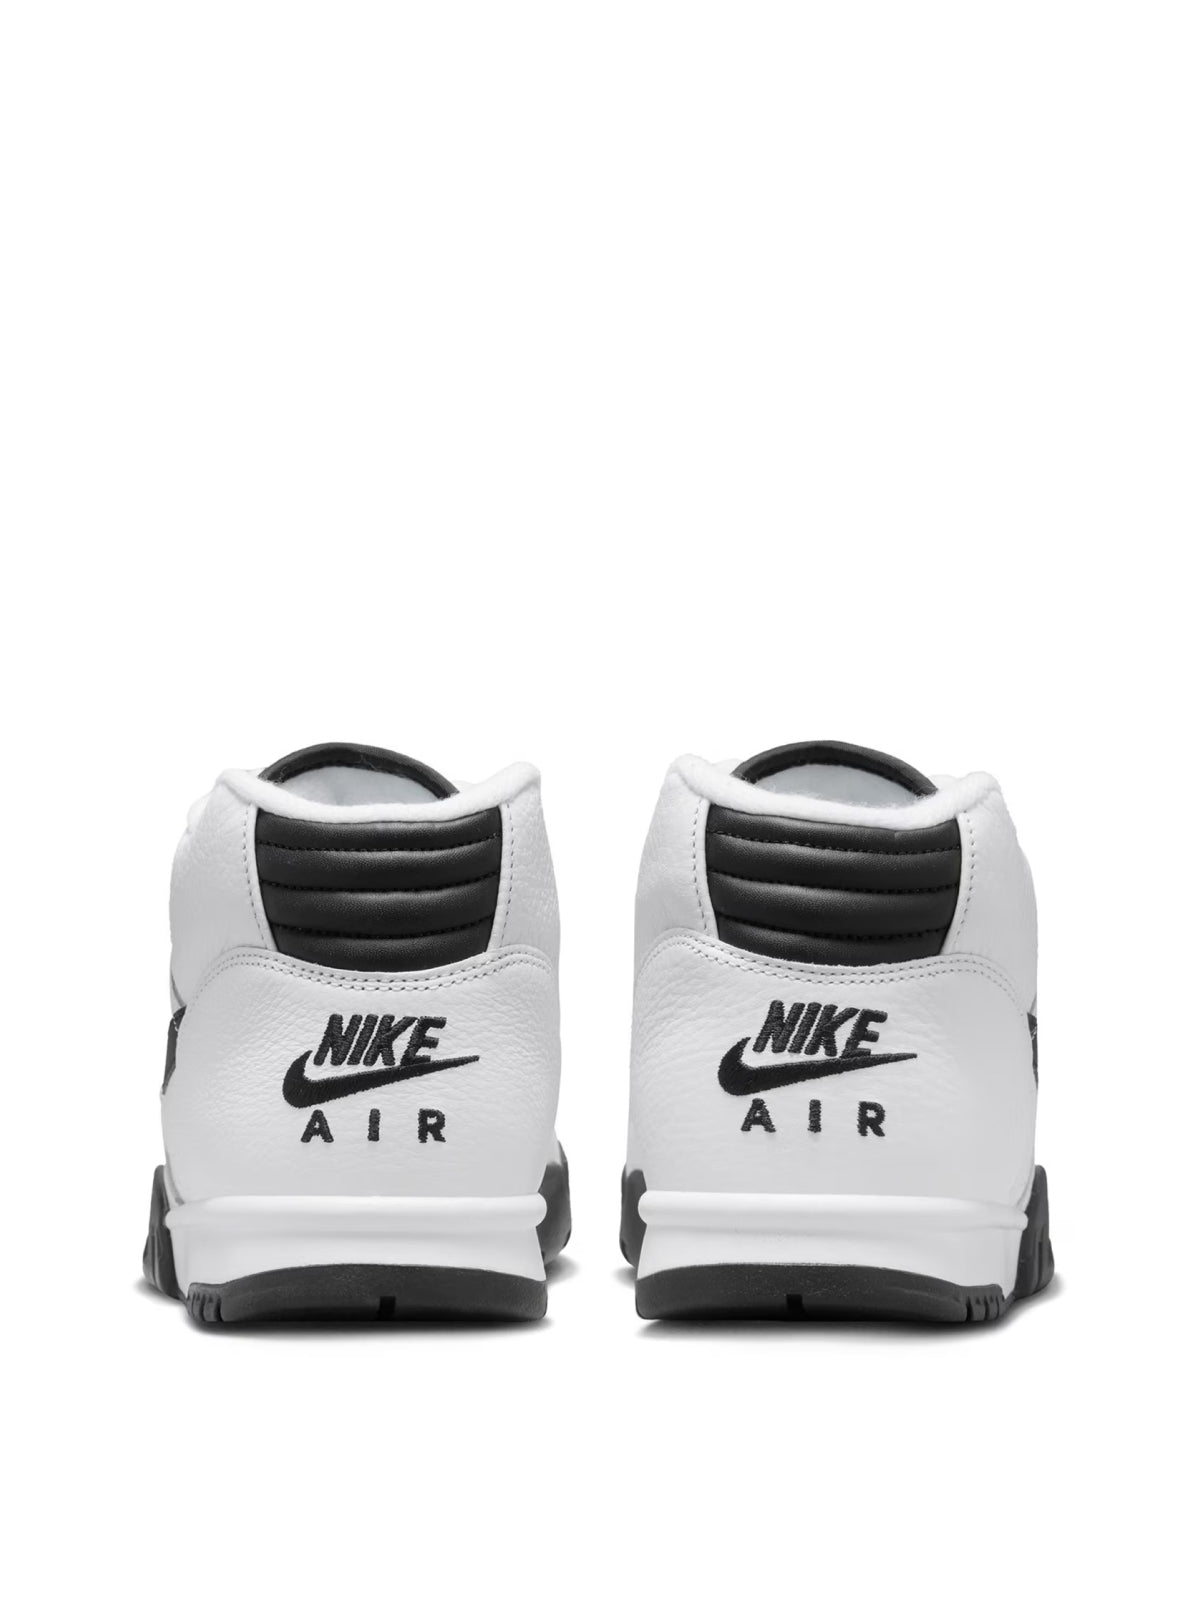 Nike-OUTLET-SALE-Air Trainer 1 Sneakers-ARCHIVIST